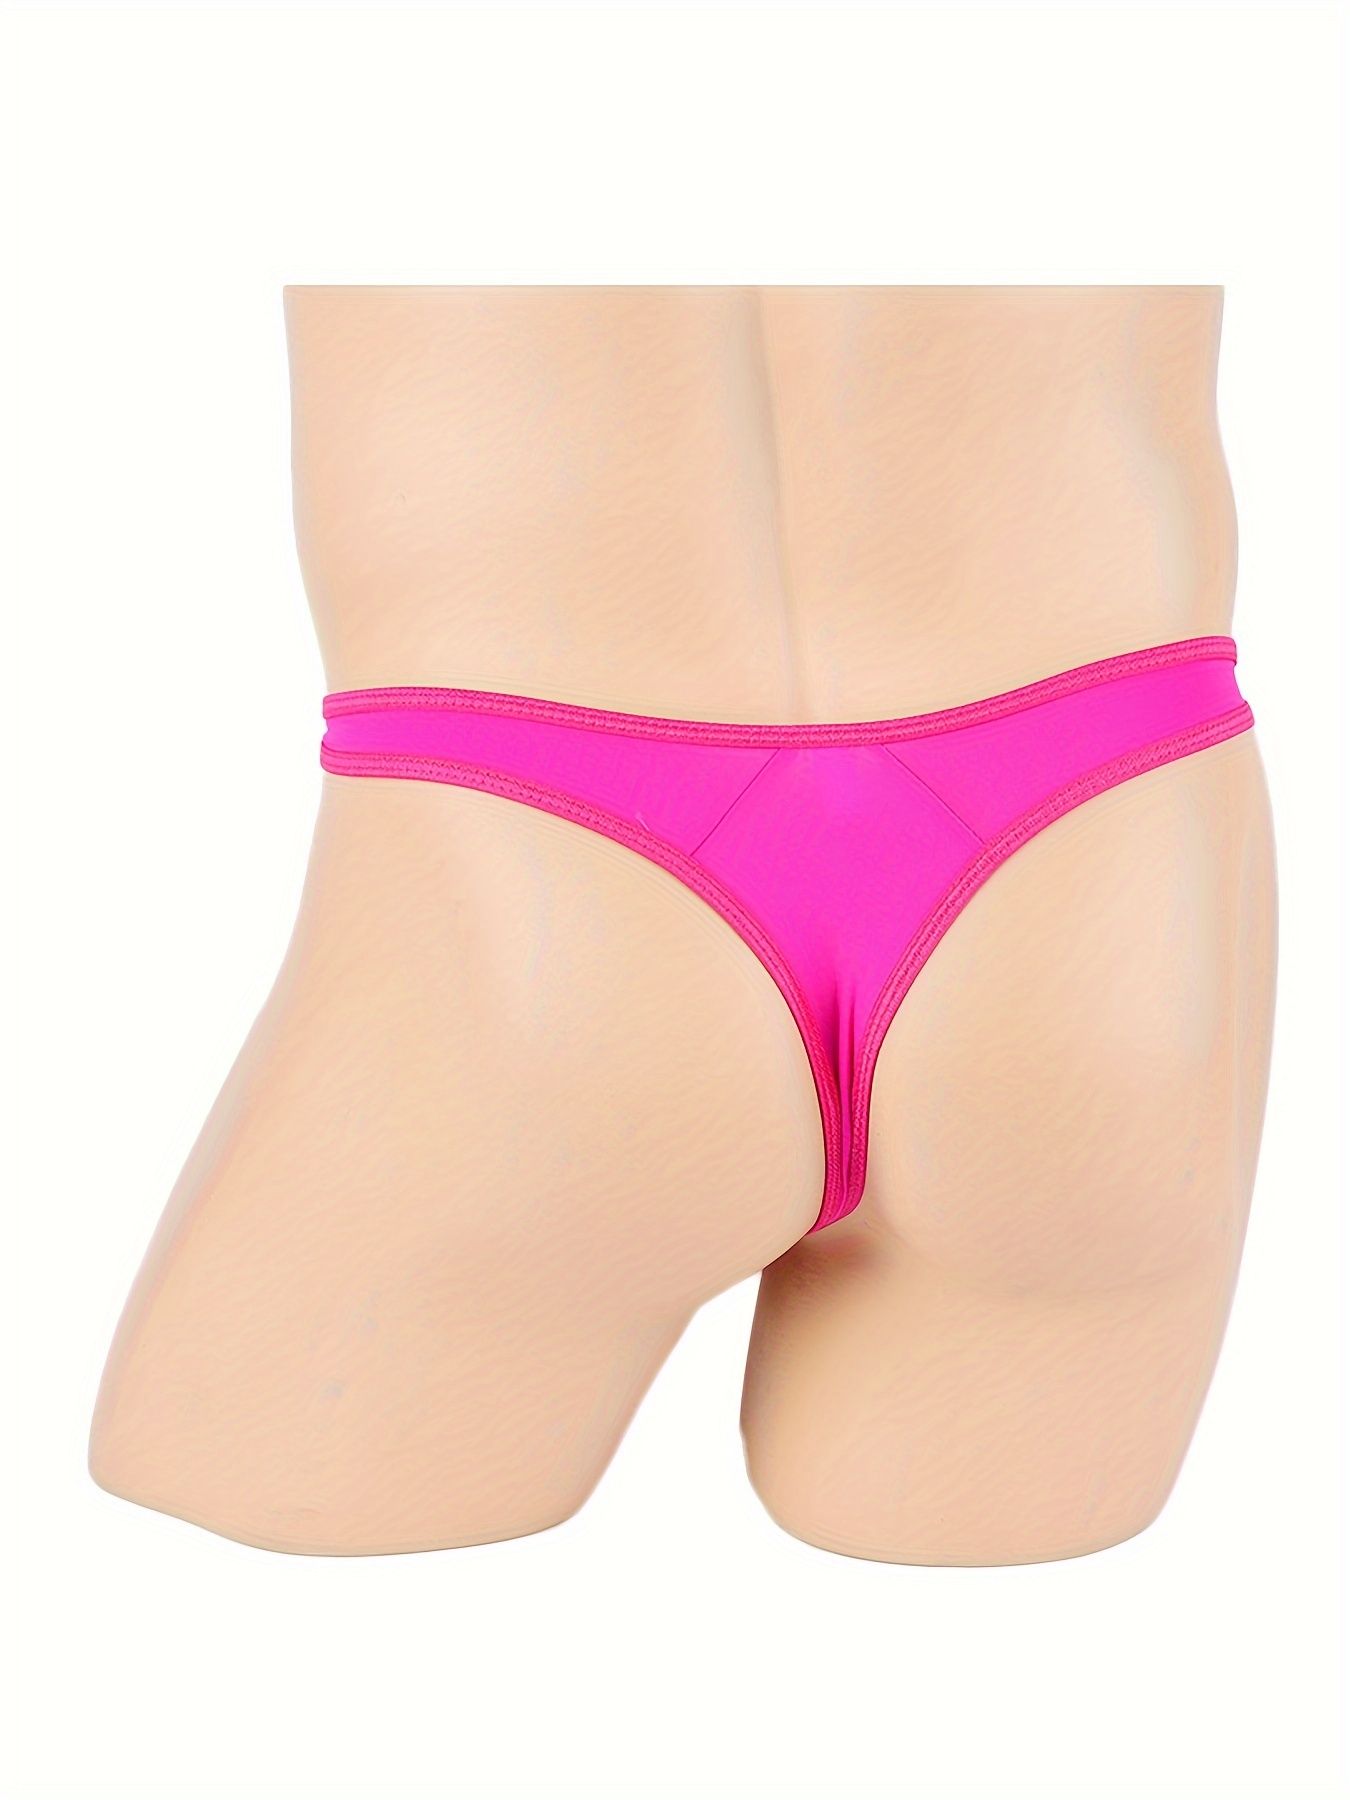 Men Thong Low Rise Briefs Underpants G-String Brief See Through T-back  Underwear